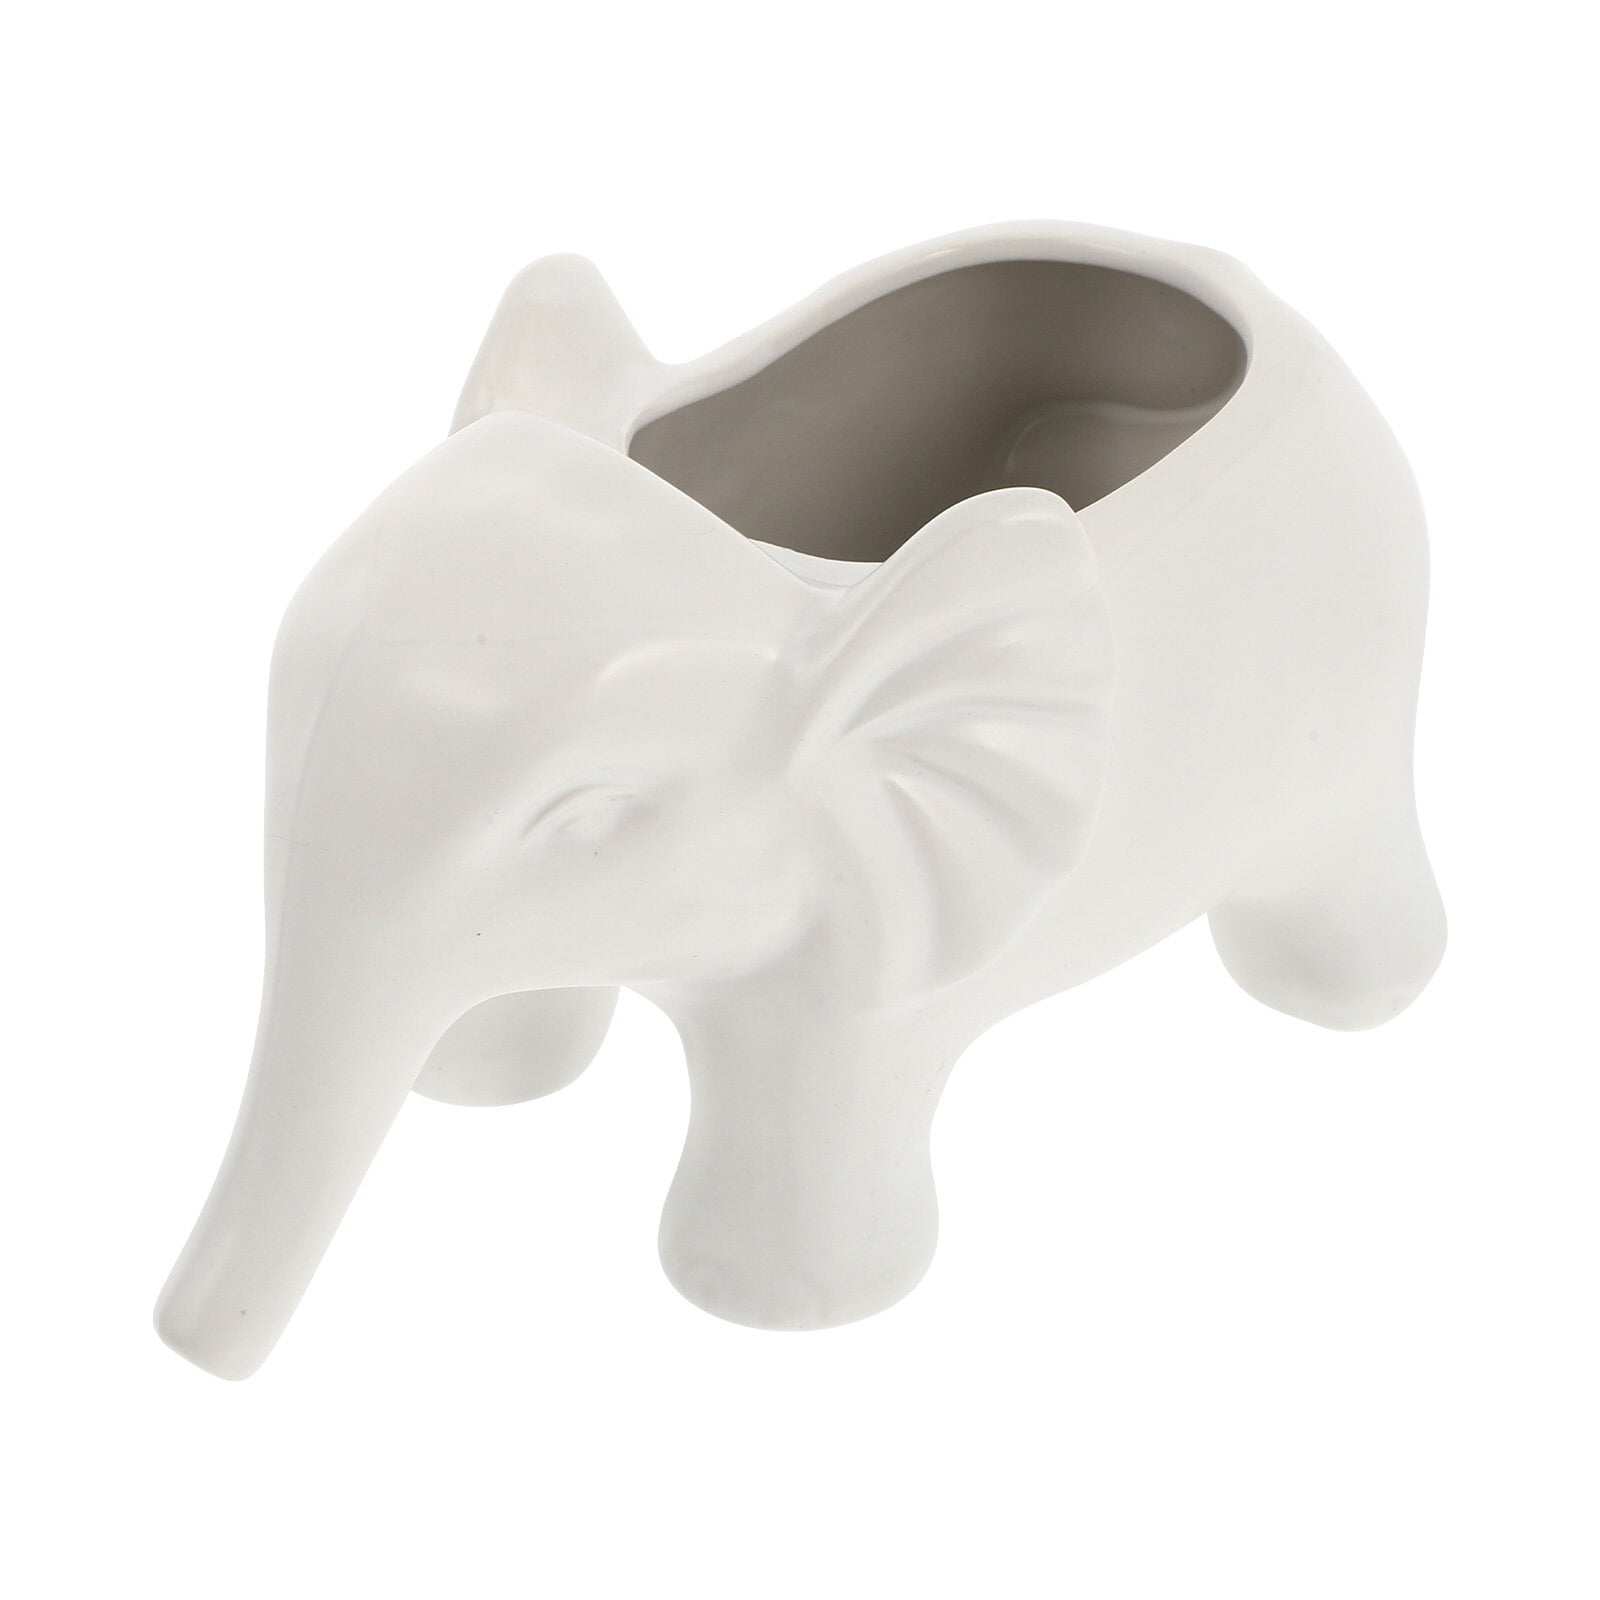 FRCOLOR 1Pc Elephant Shape Cup Decorative Drinking Cup Home Bar